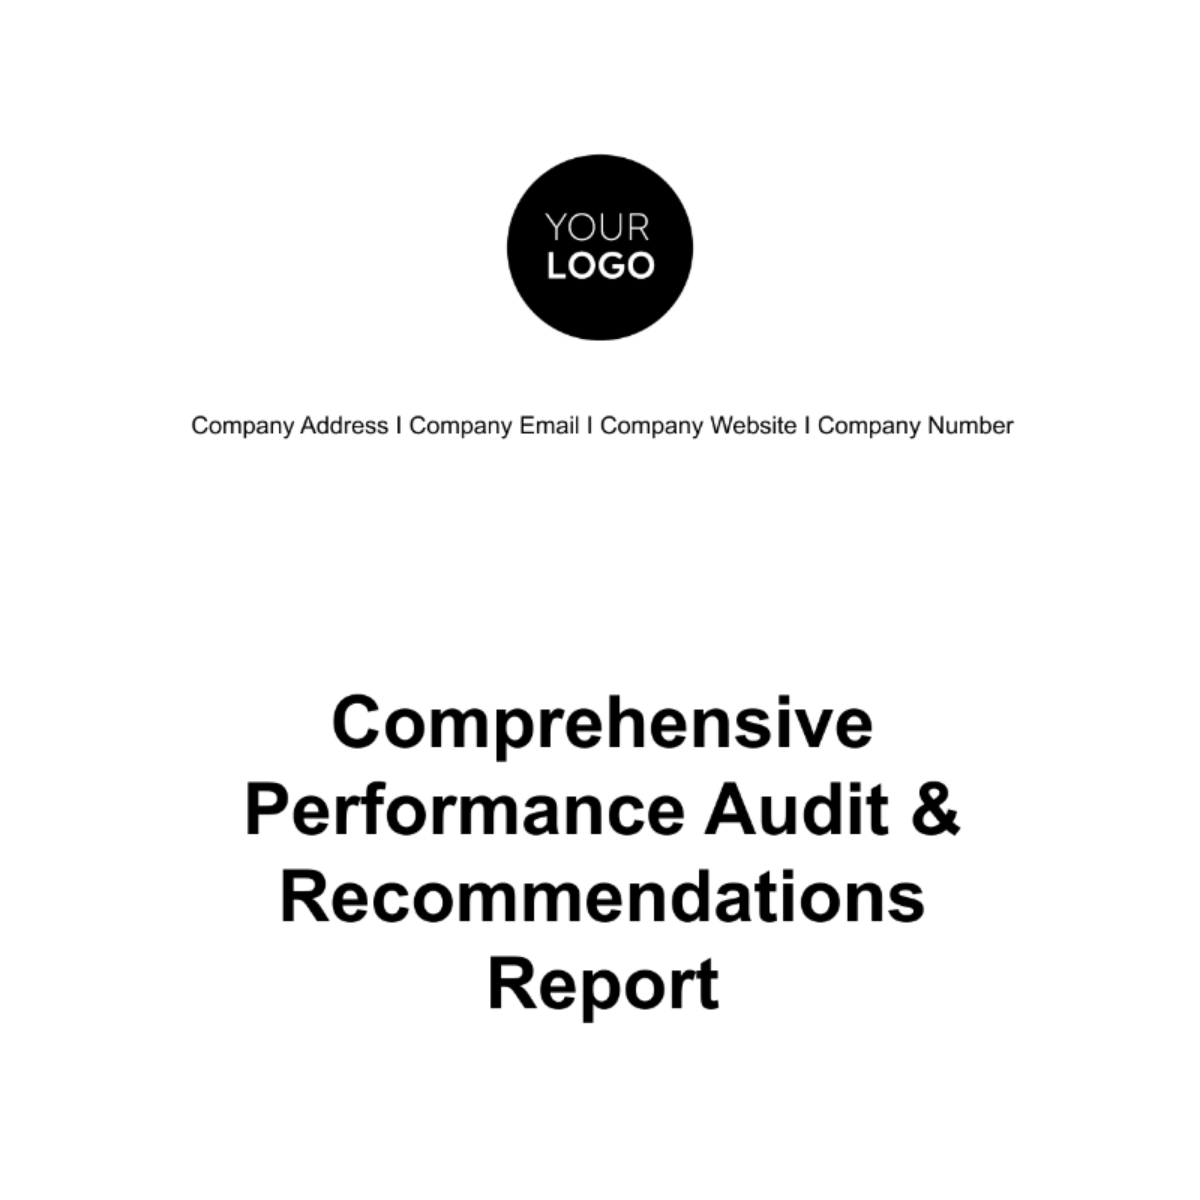 Comprehensive Performance Audit & Recommendations Report HR Template